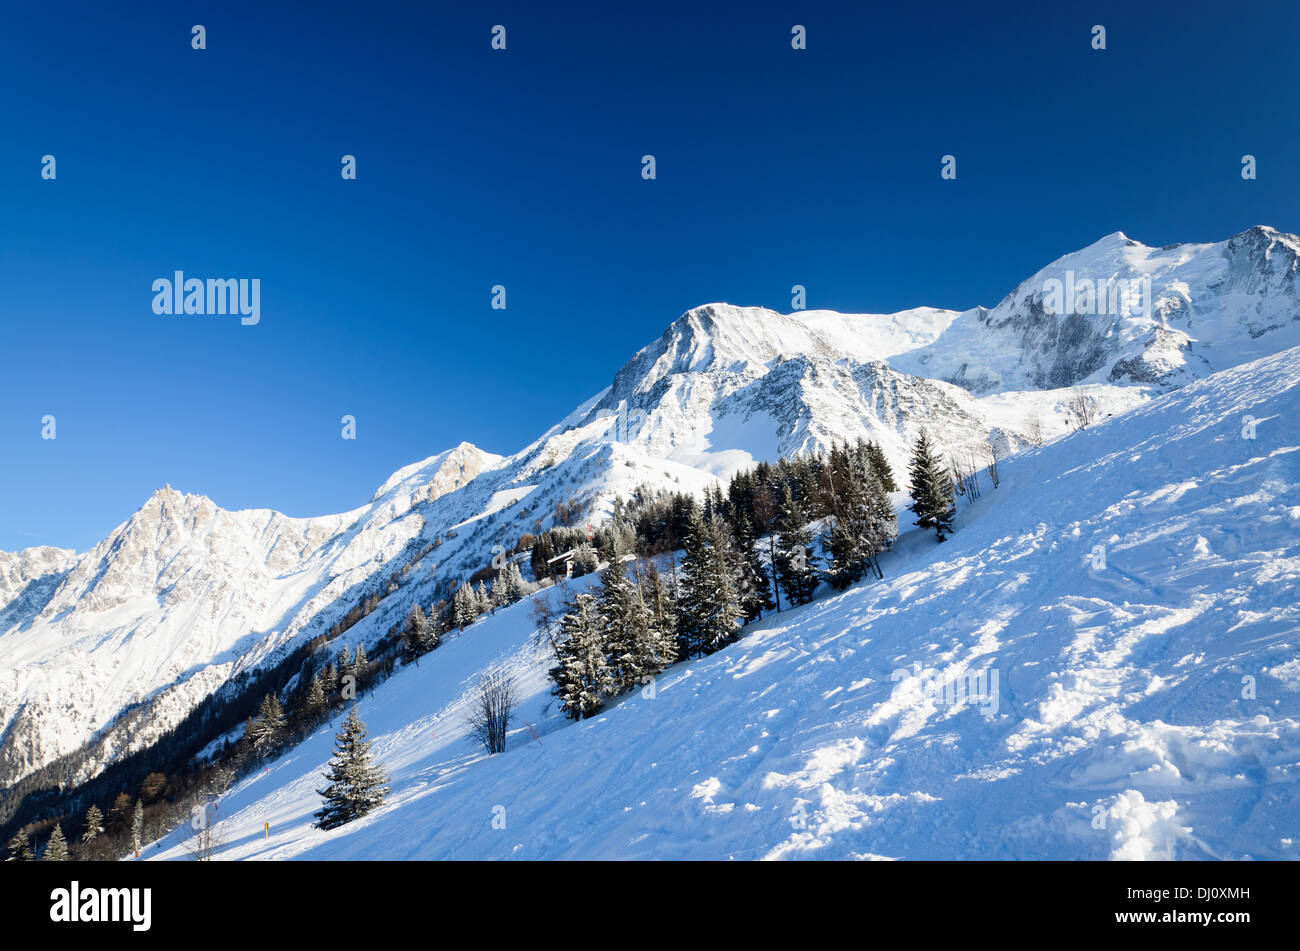 Snow hill with skiing pistes Stock Photo